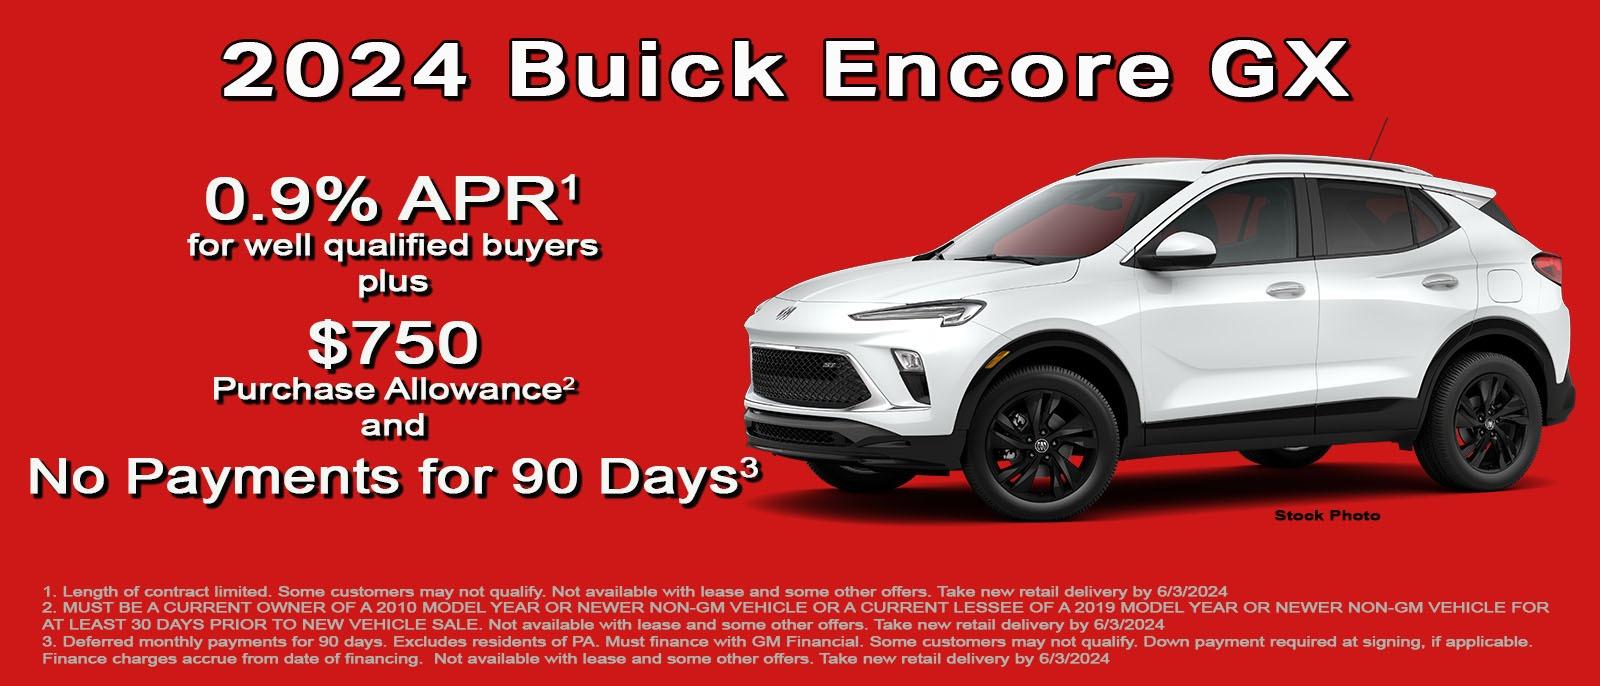 Save big on your new Buick GX